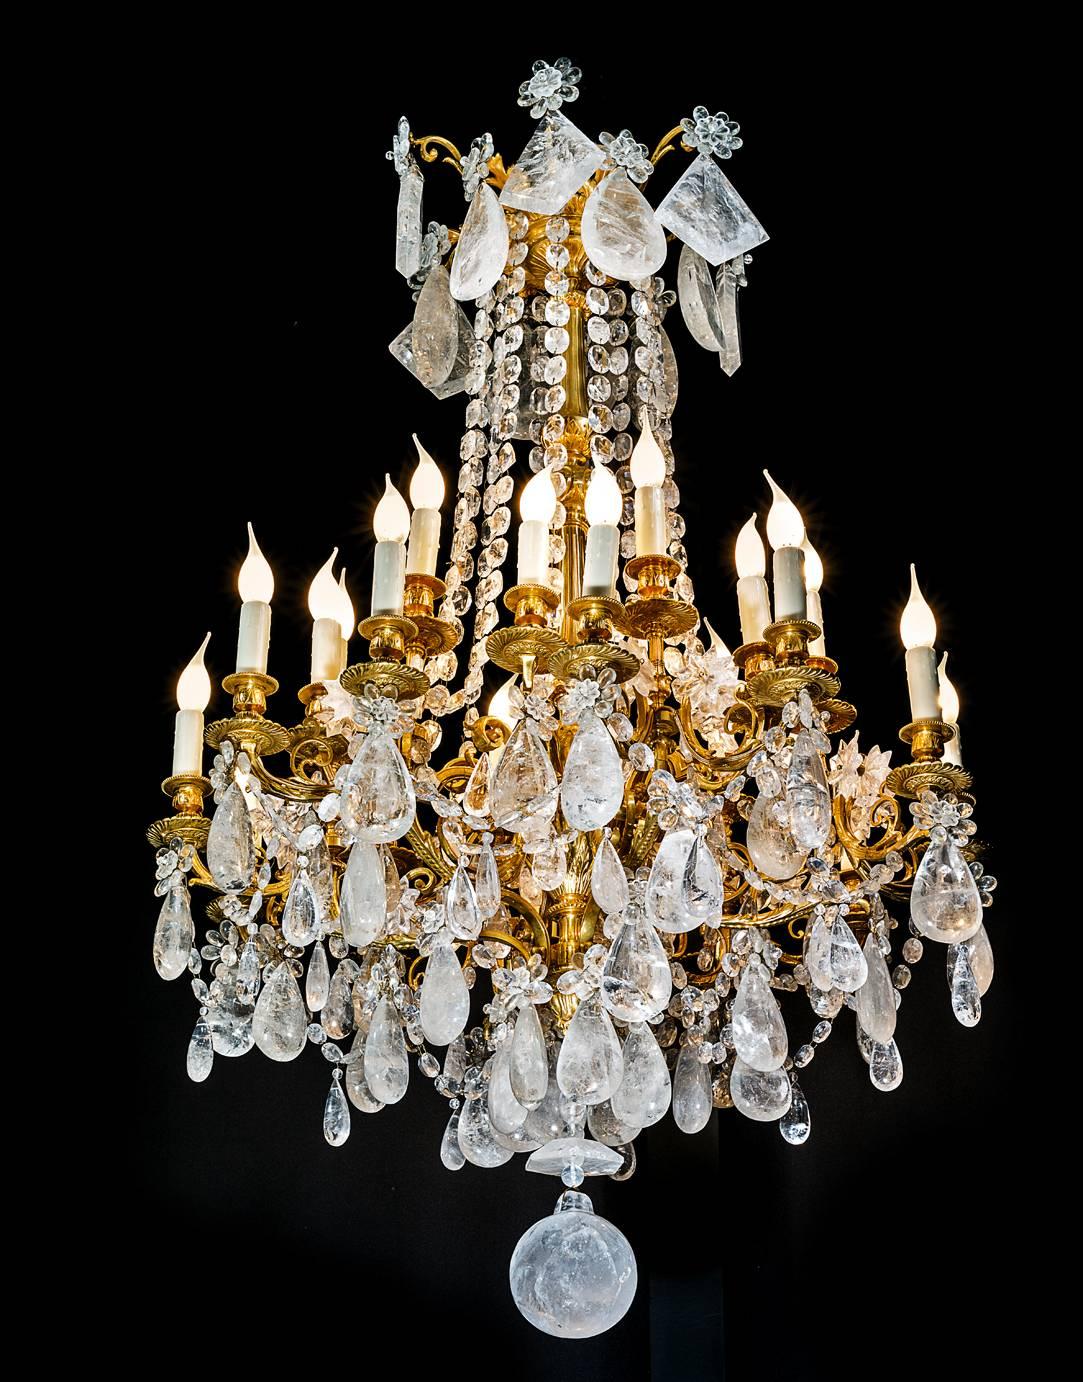 French ormolu bronze chandelier in the style of Louis XVI.
Modern rock crystal quartz stone specially carved for this chandelier.
24 lights.
Unique.